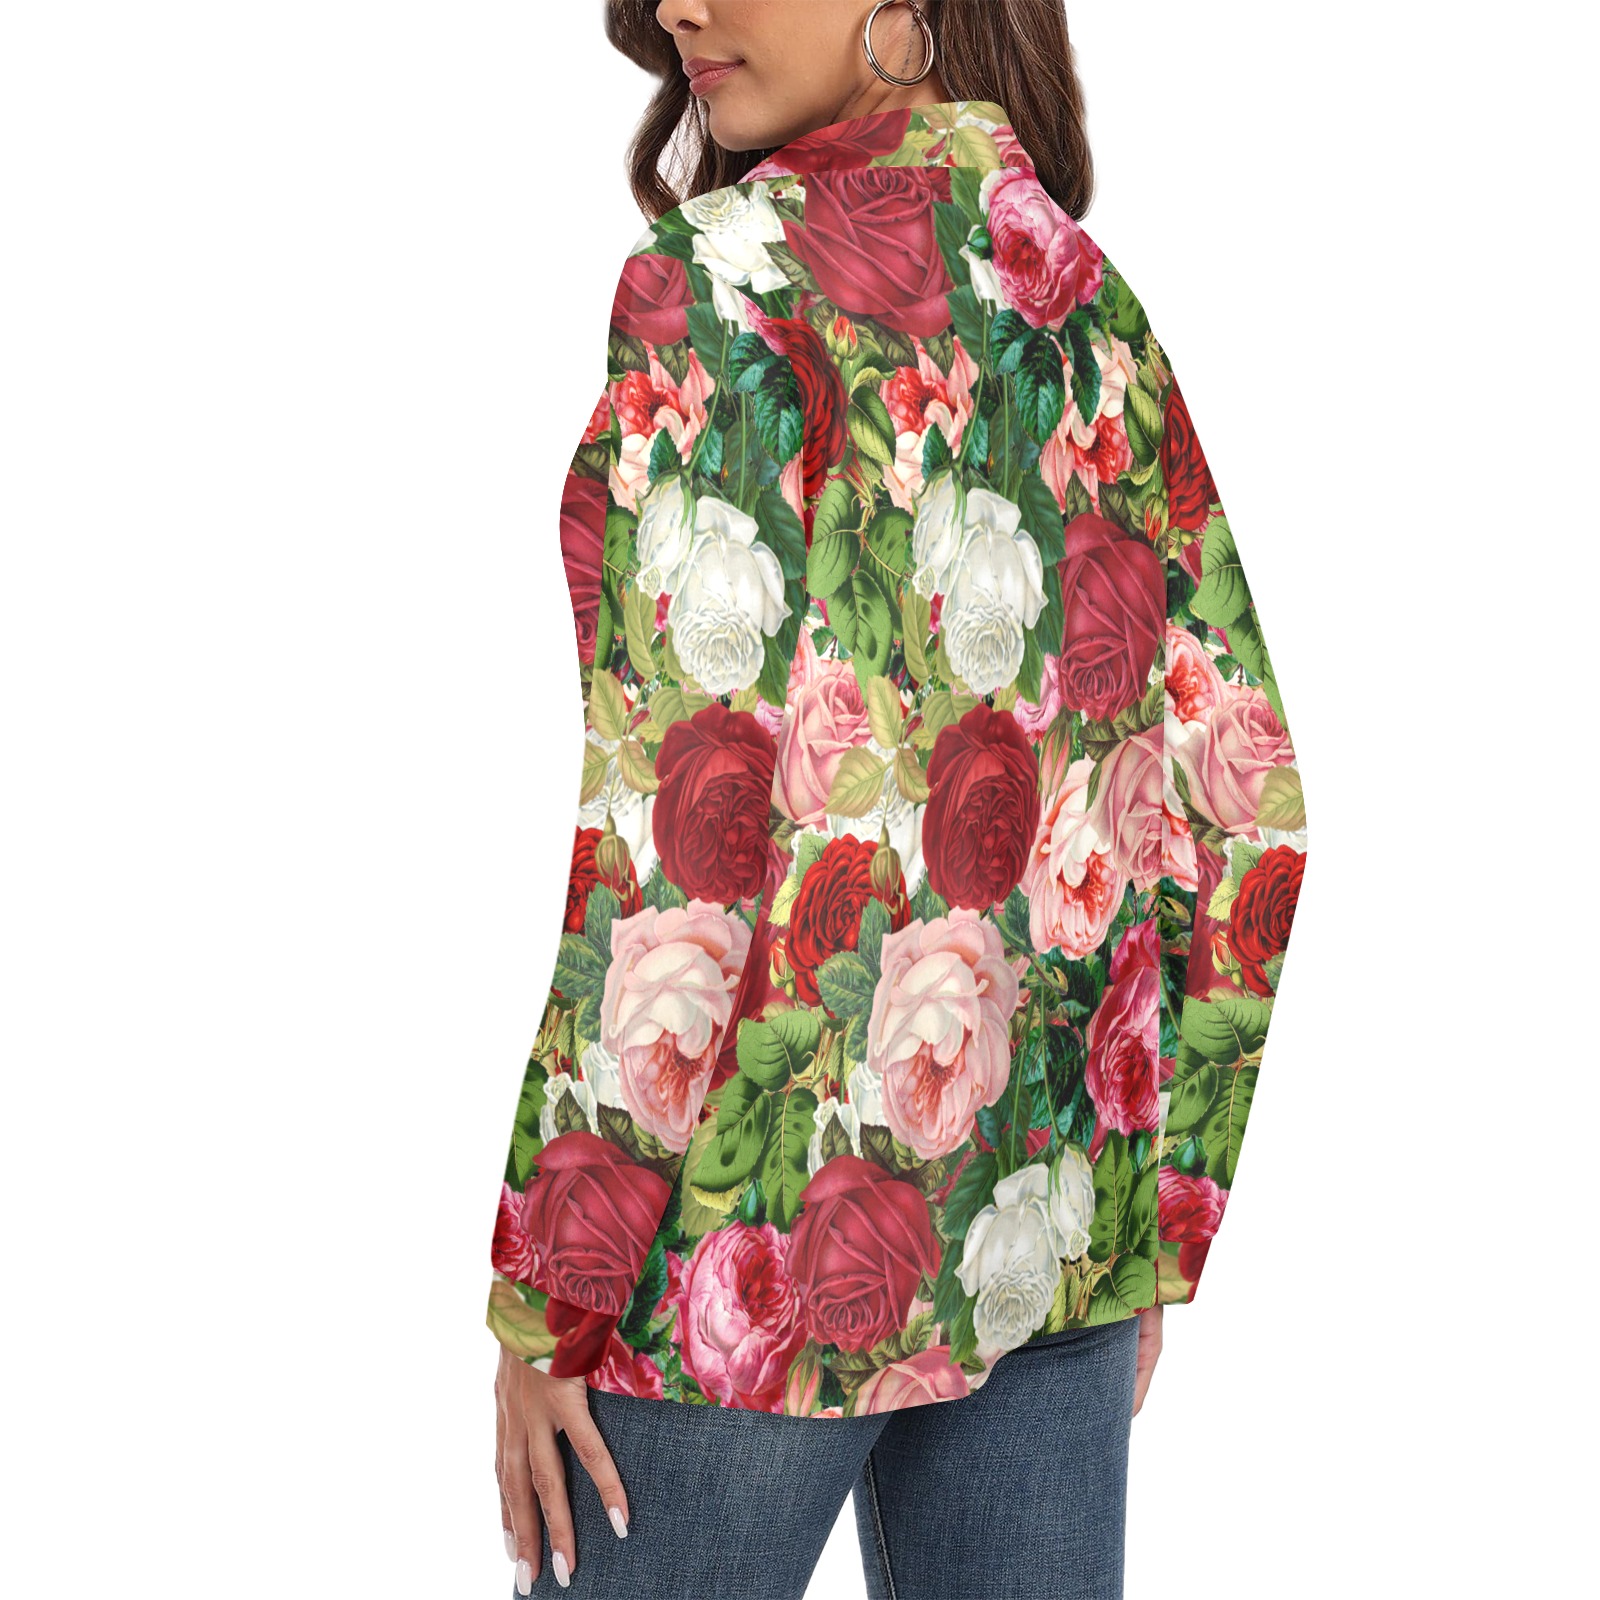 Vintage Roses and Carnation Flowers Women's Long Sleeve Polo Shirt (Model T73)